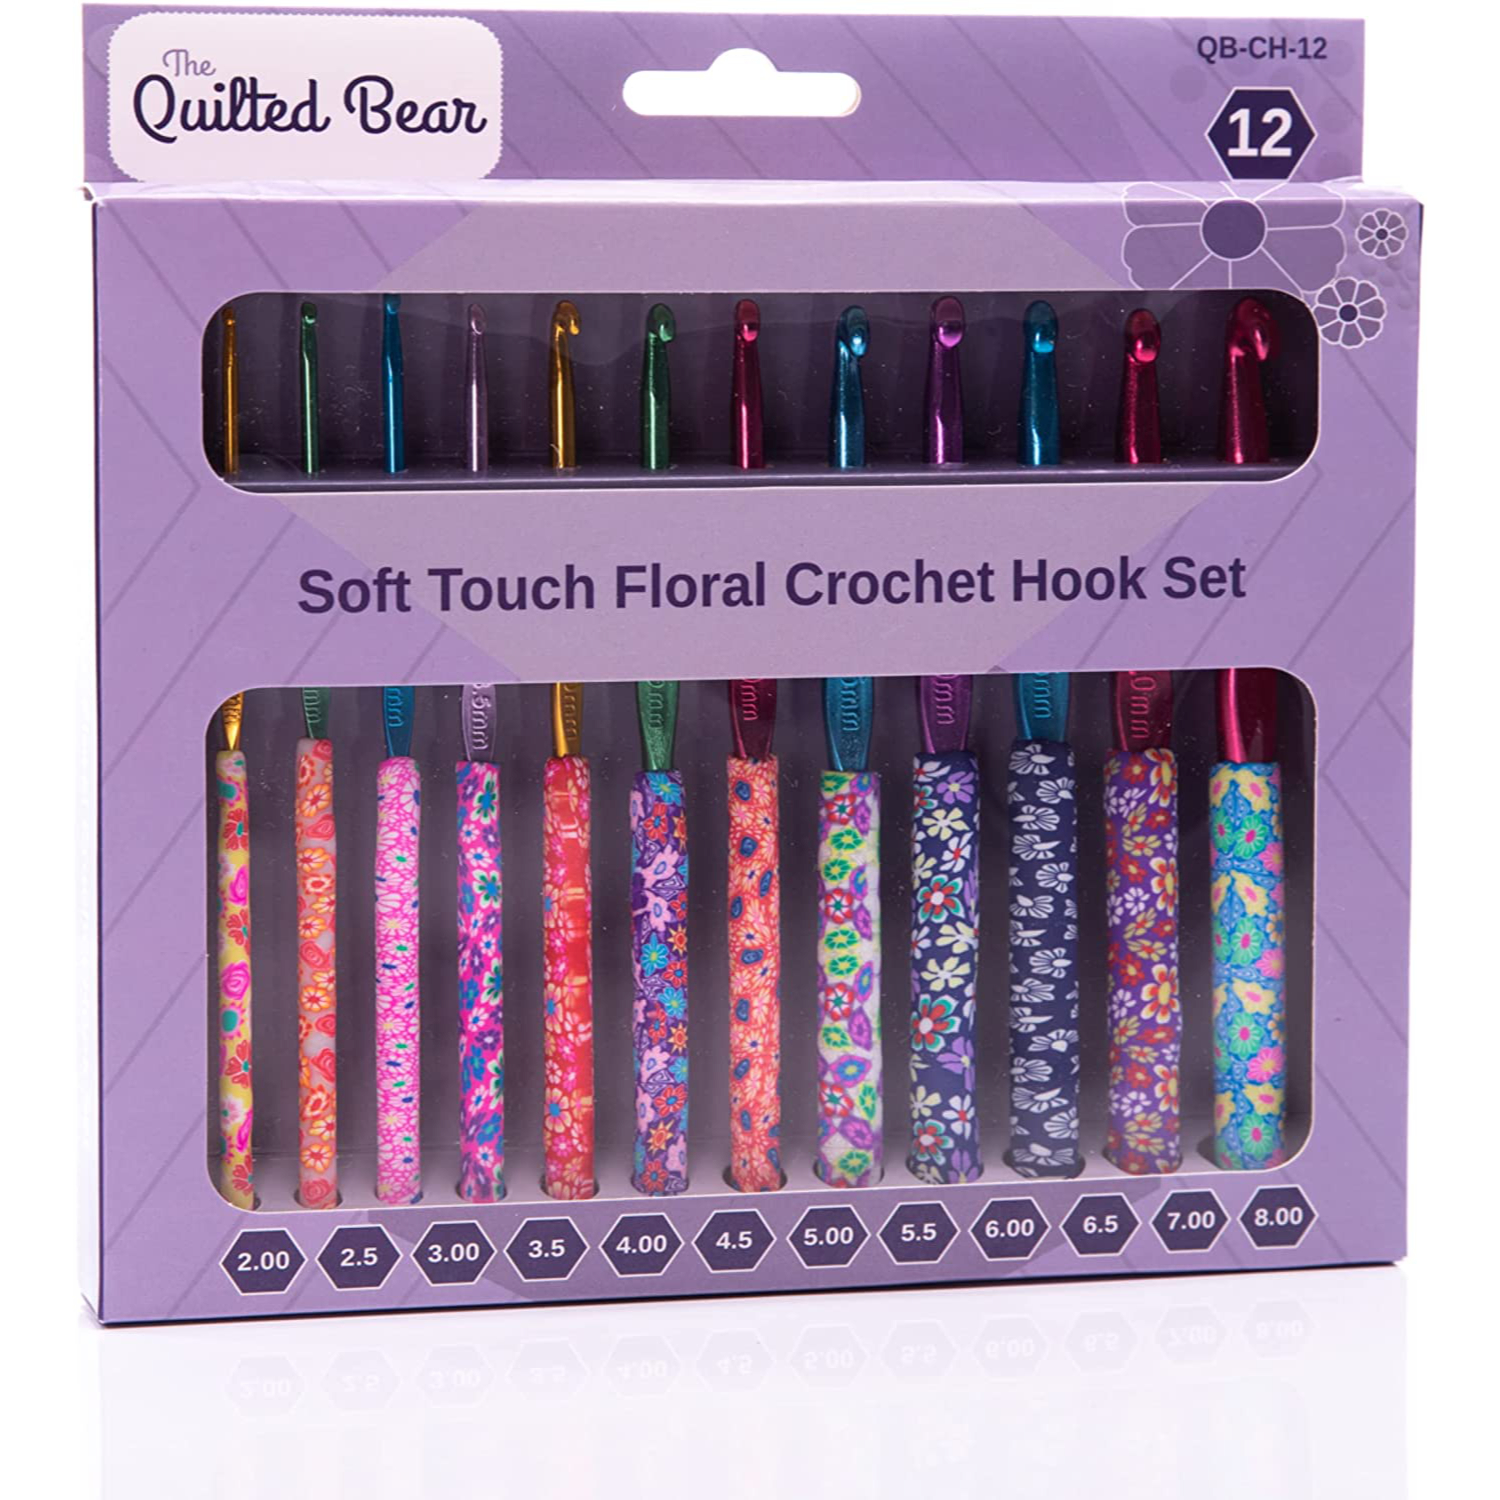 The Quilted Bear Crochet Hook Set – Premium Soft Grip Floral Hooks with  Ergonomic Polymer Clay Handle 12 (2mm, 2.5mm, 3mm, 3.5mm, 4mm, 4.5mm, 5mm,  5.5mm, 6mm, 6.5mm, 7mm & 8mm) –